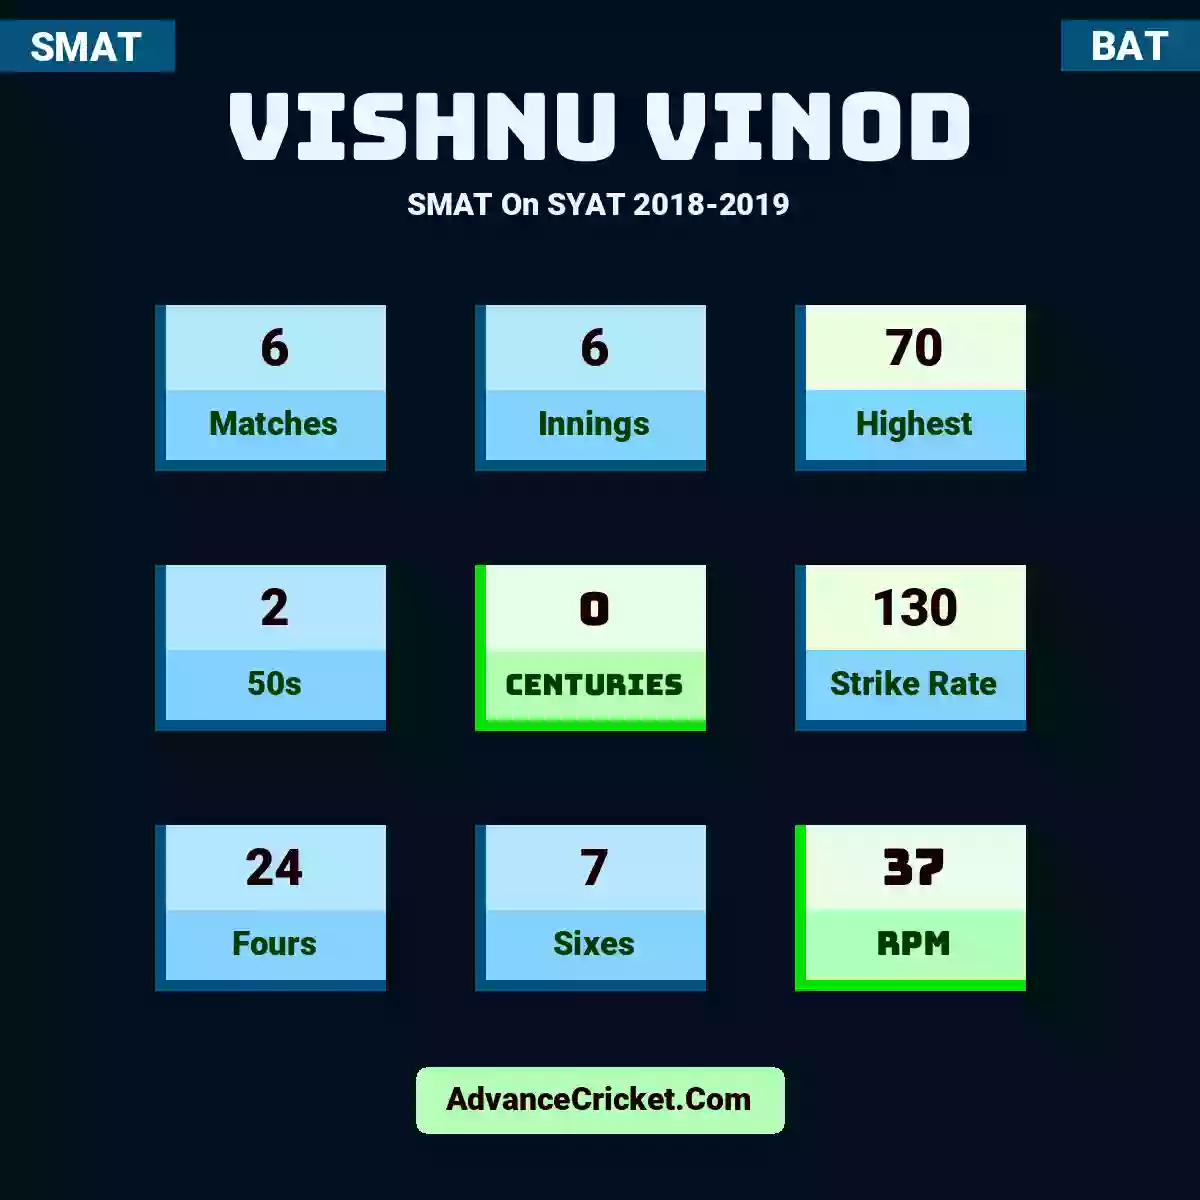 Vishnu Vinod SMAT  On SYAT 2018-2019, Vishnu Vinod played 6 matches, scored 70 runs as highest, 2 half-centuries, and 0 centuries, with a strike rate of 130. V.Vinod hit 24 fours and 7 sixes, with an RPM of 37.